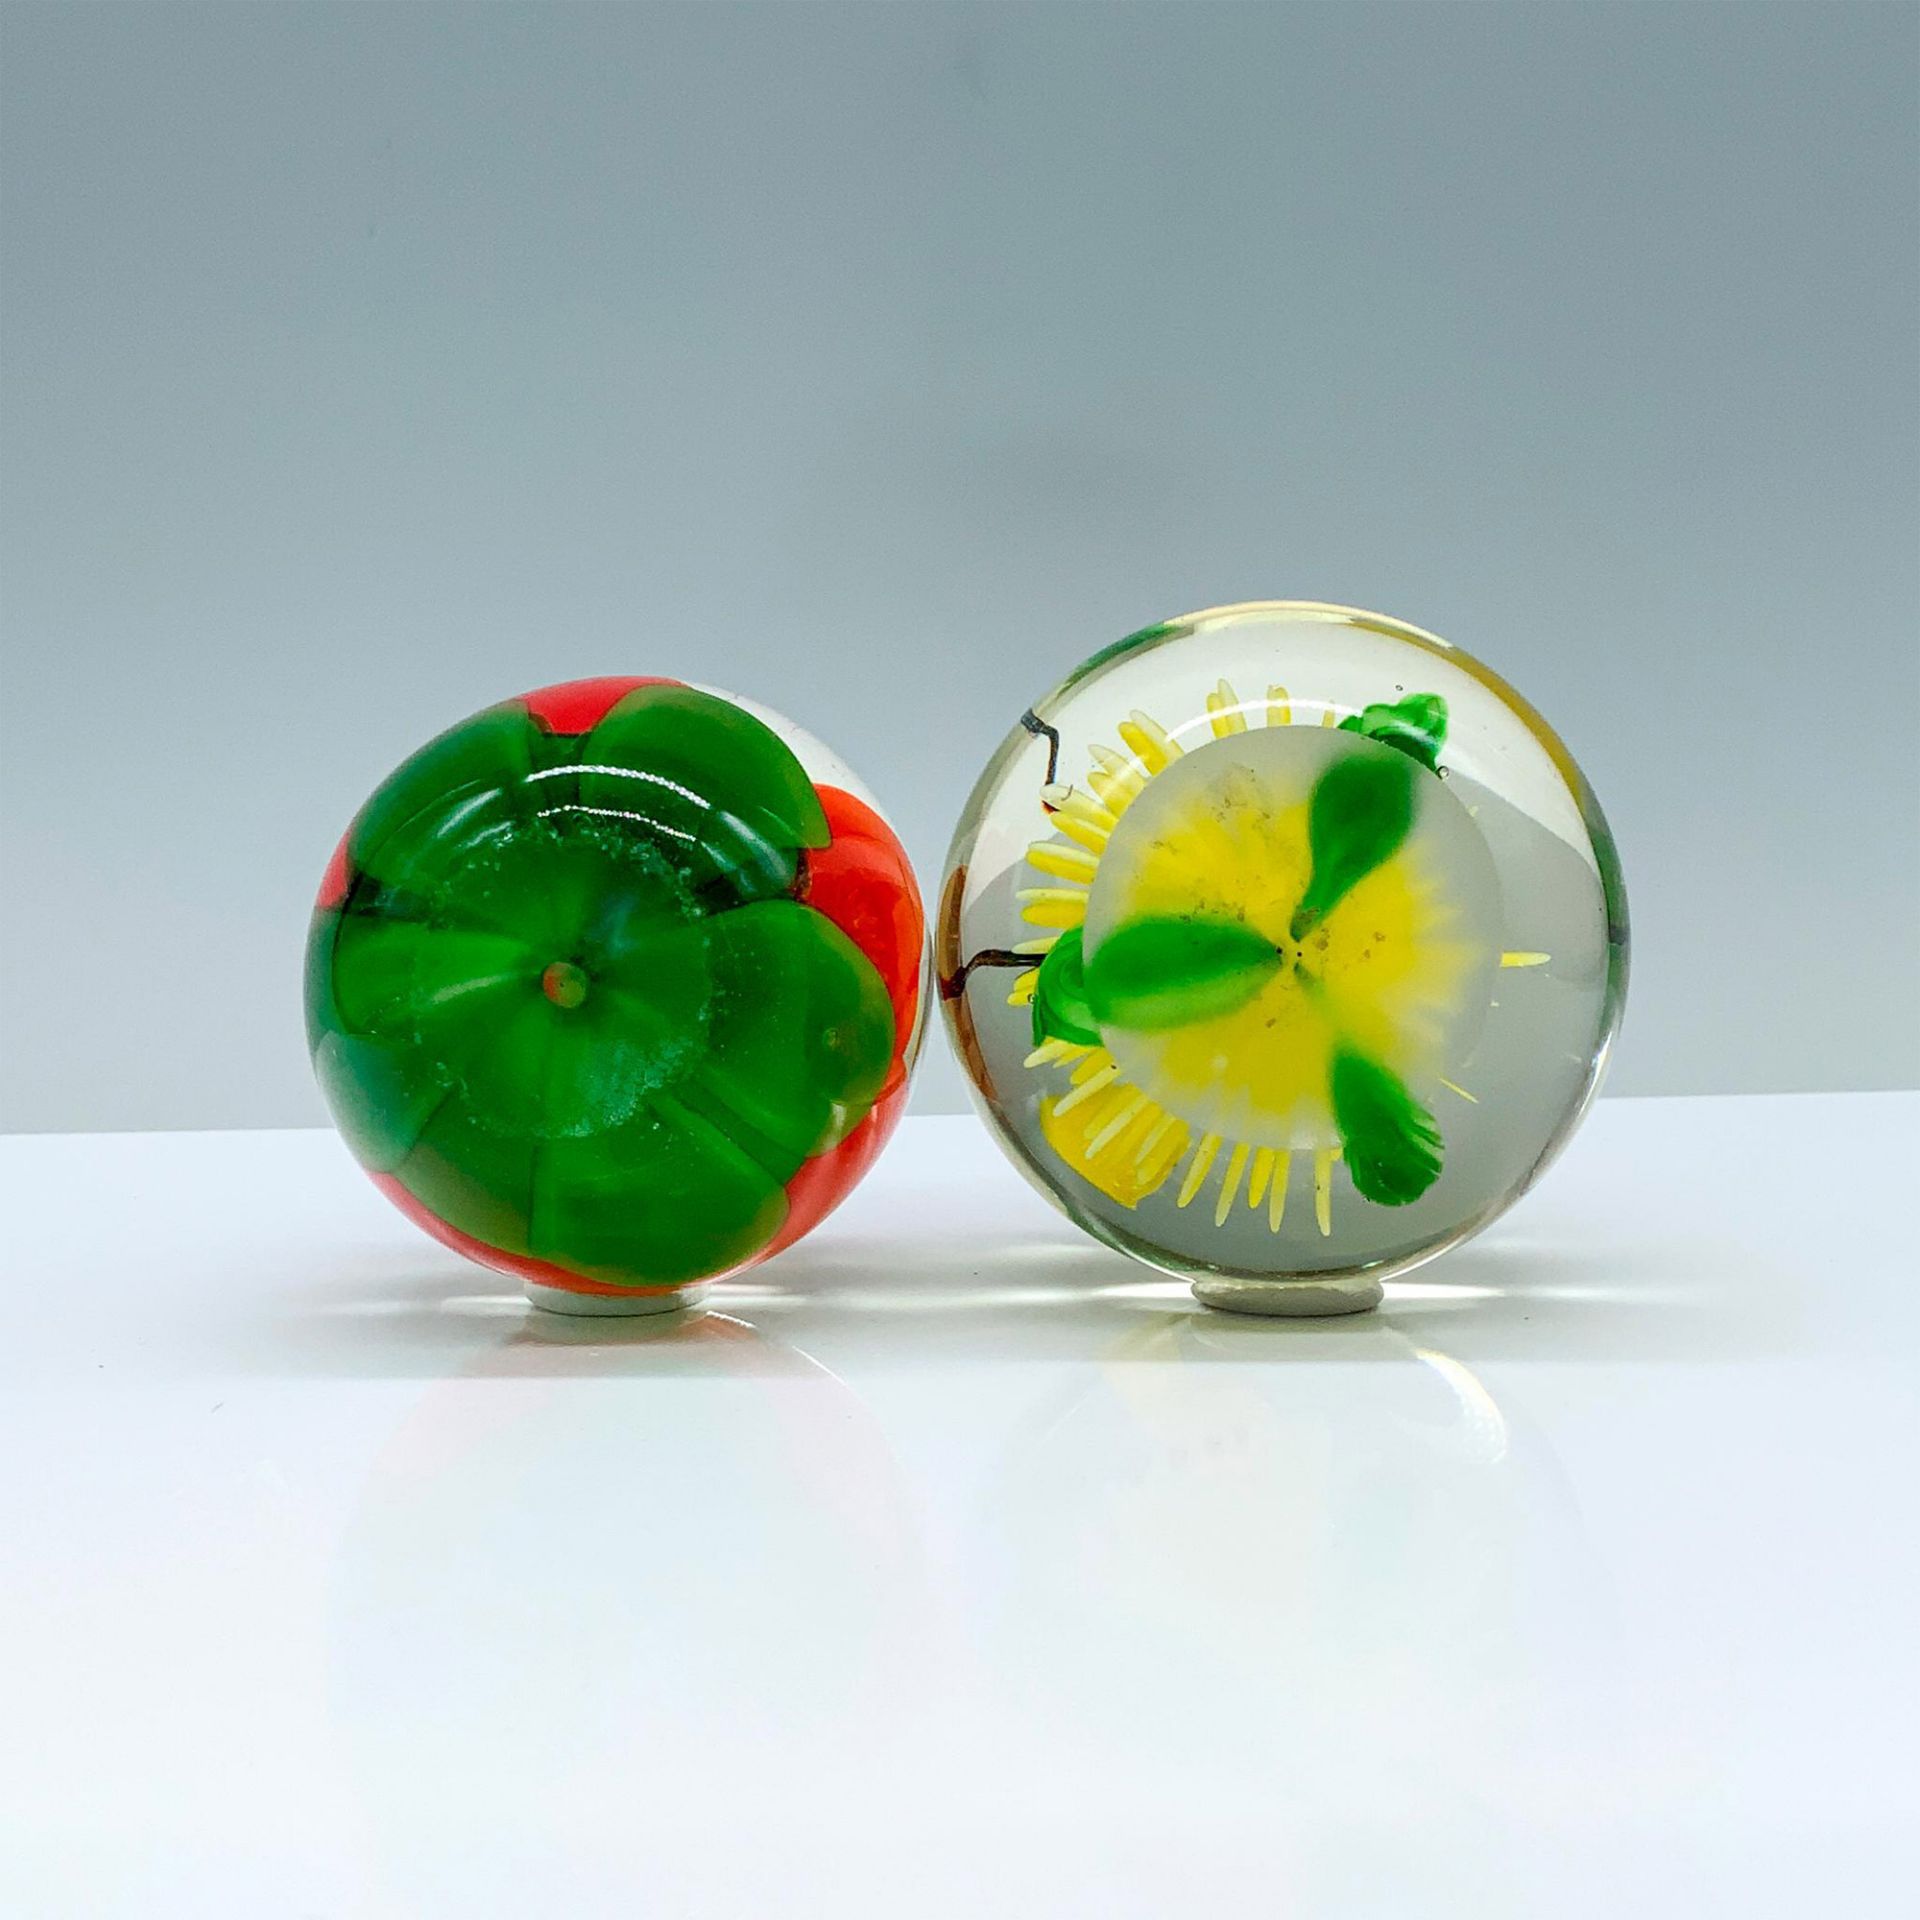 2pc Floral Motif Art Glass Paperweights - Image 3 of 3